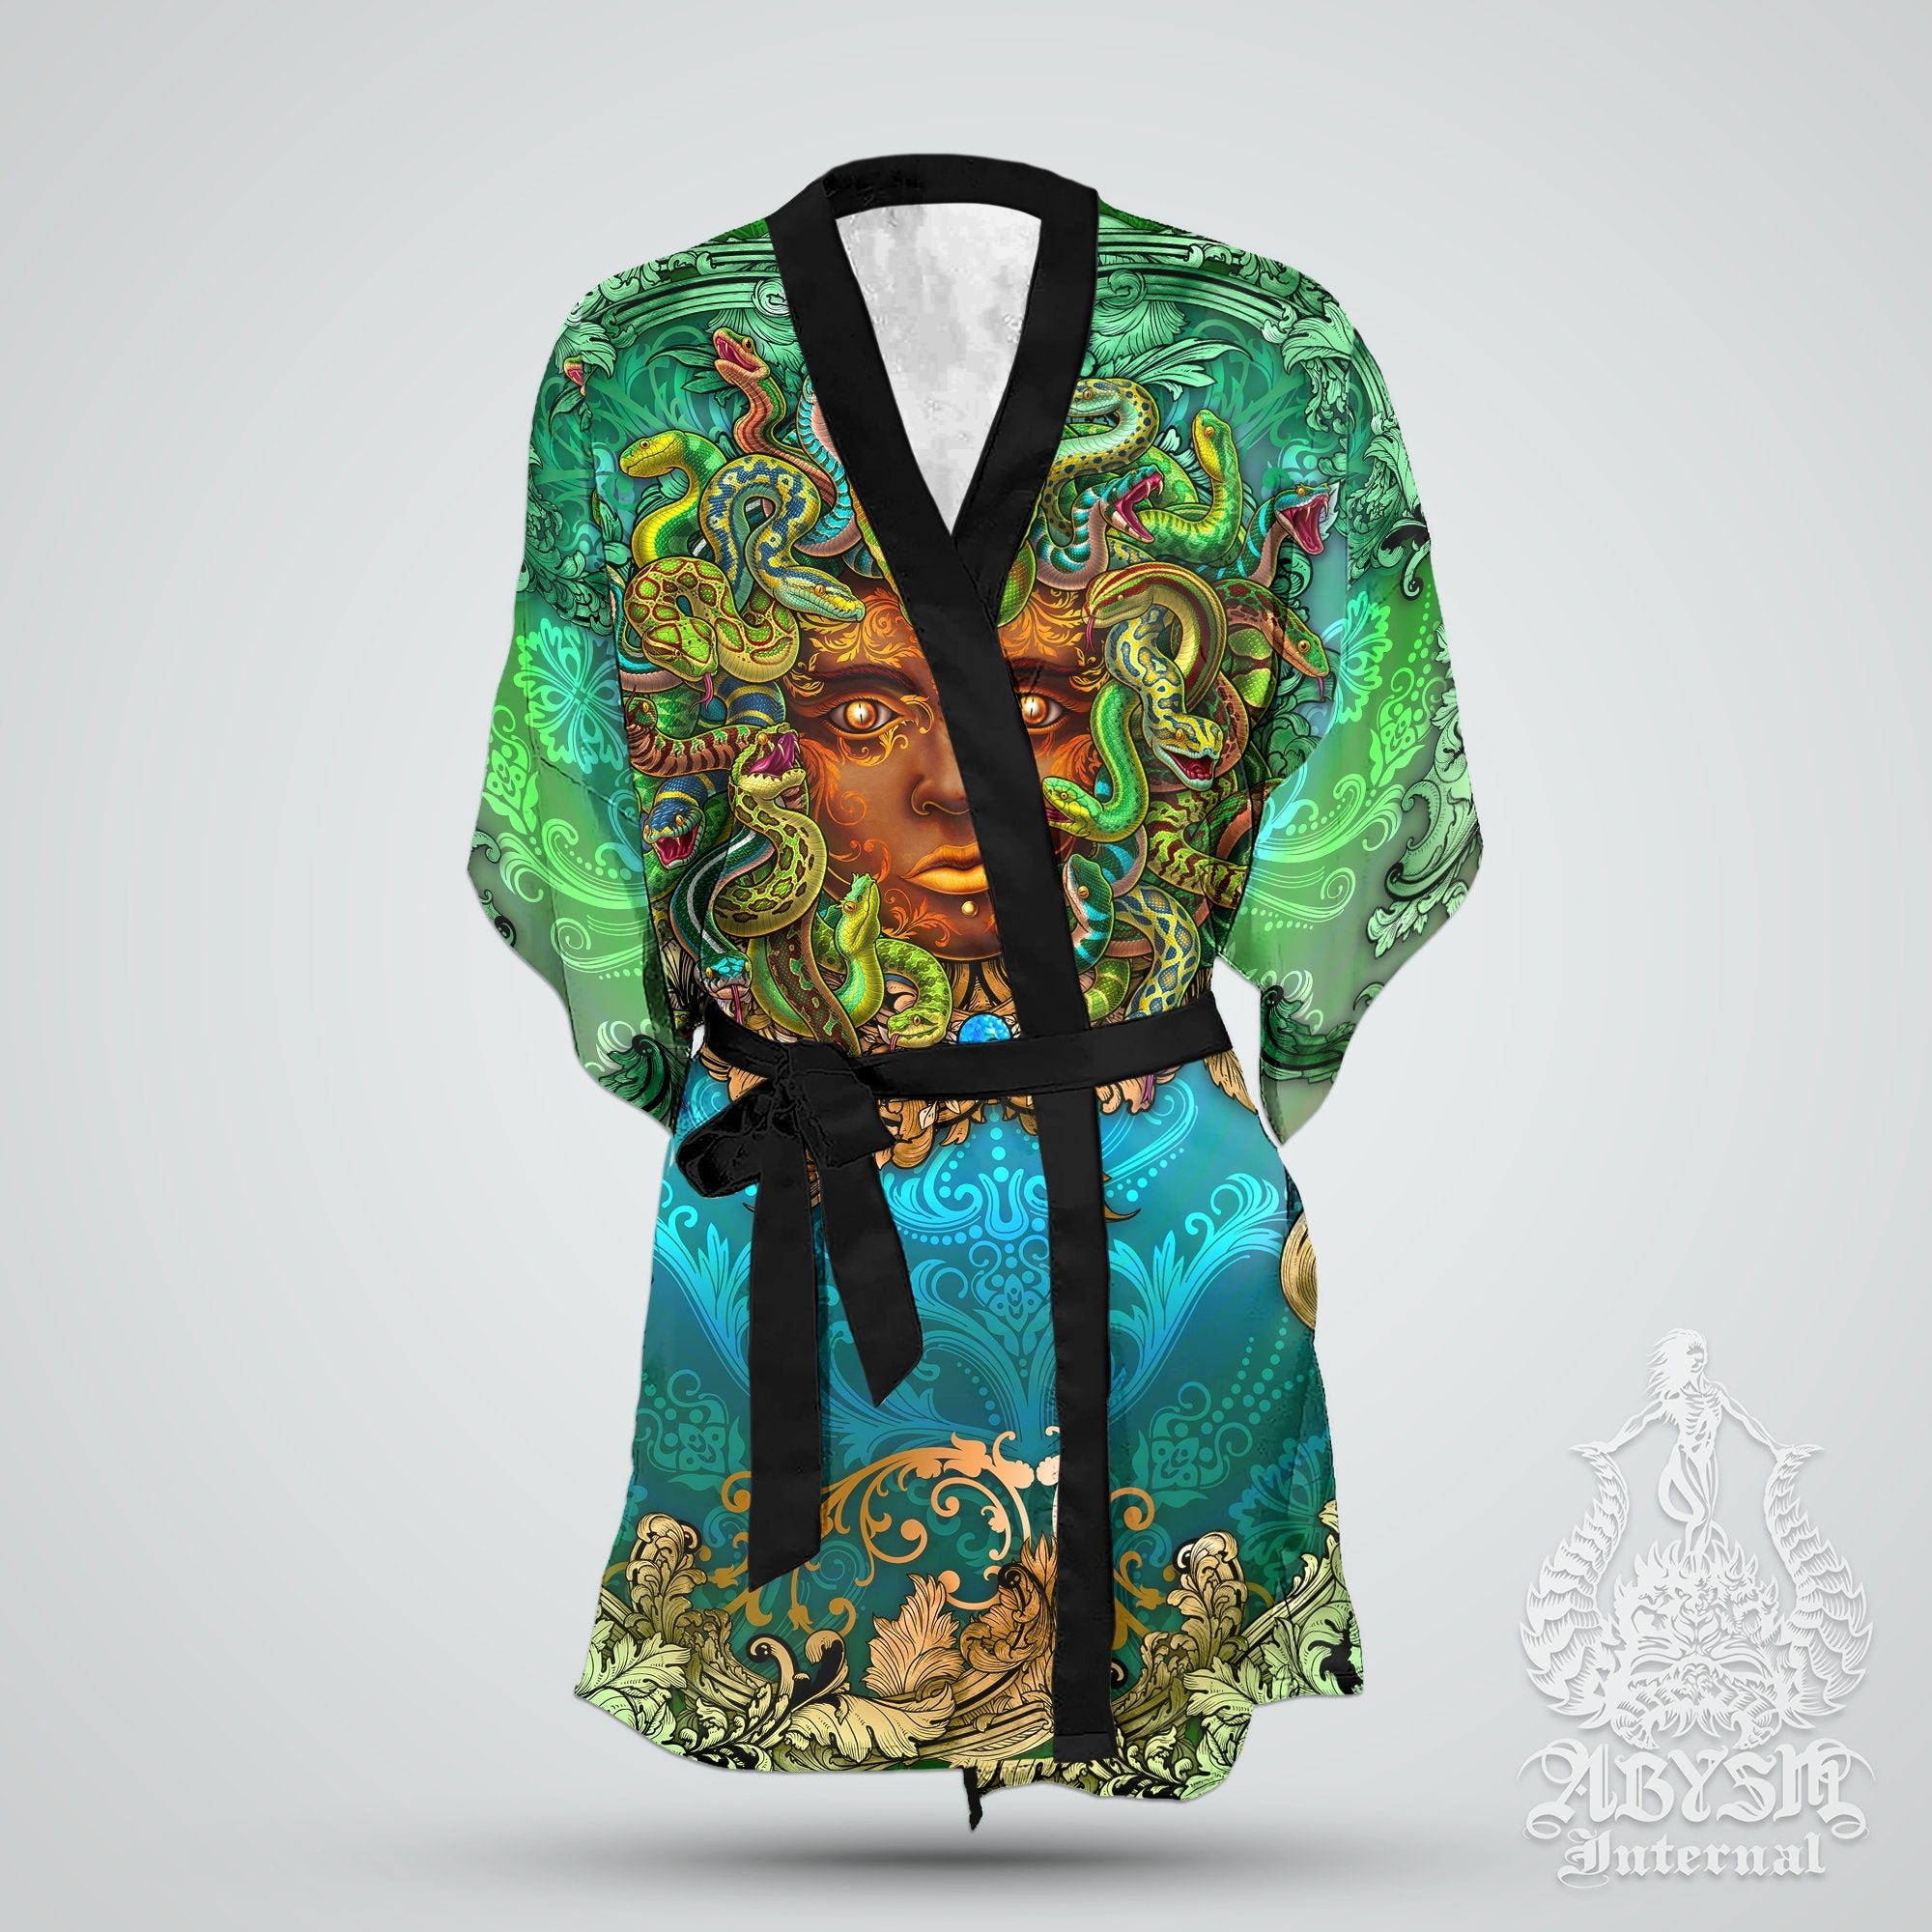 Medusa Cover Up, Beach Outfit, Party Kimono, Summer Festival Robe, Indie and Alternative Clothing, Unisex - Nature - Abysm Internal